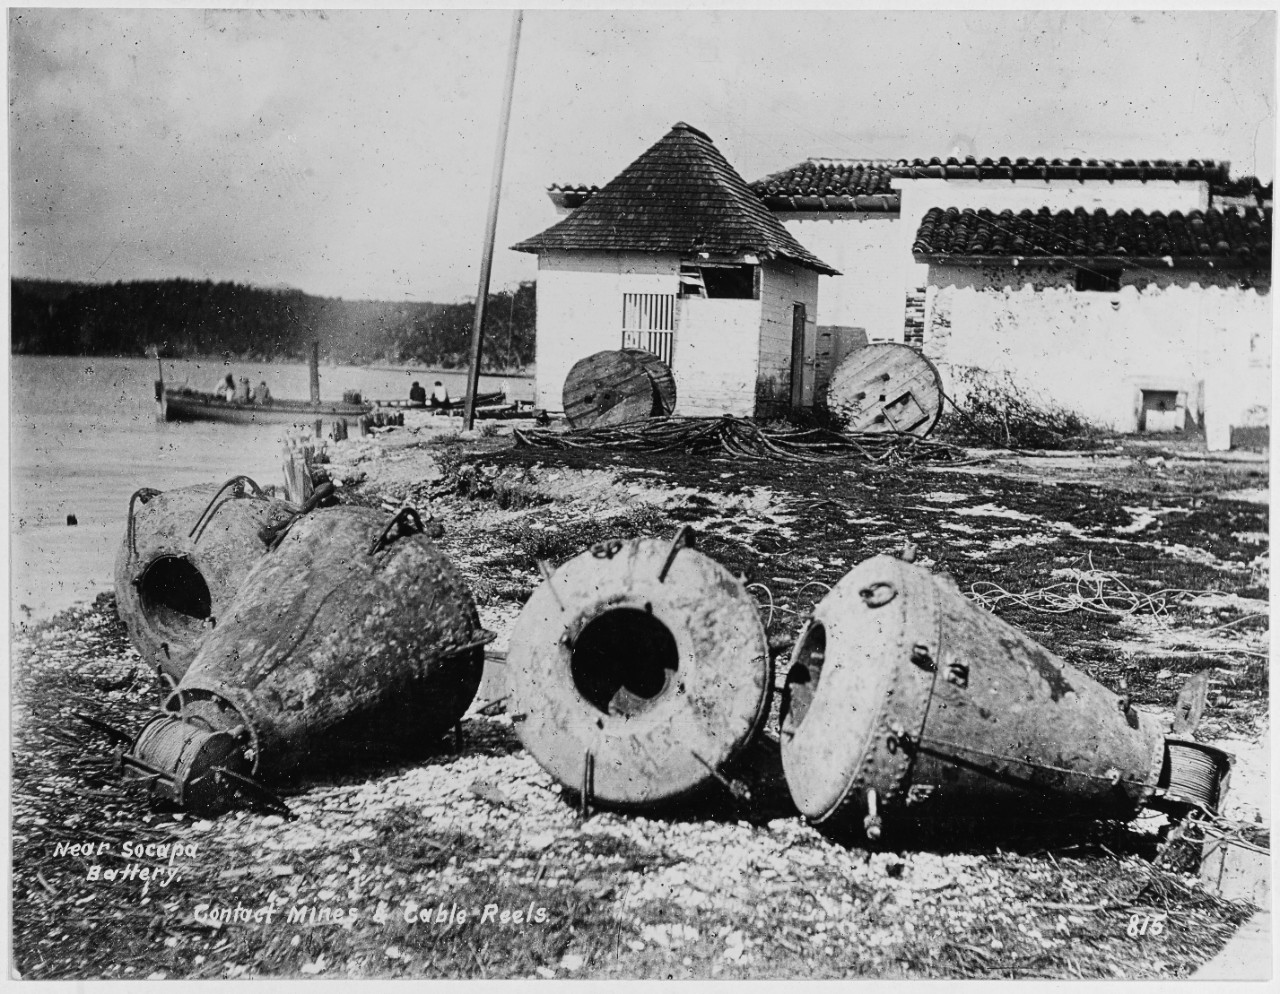 Photo #: NH 2076  Spanish Contact Mines and Cable Reels